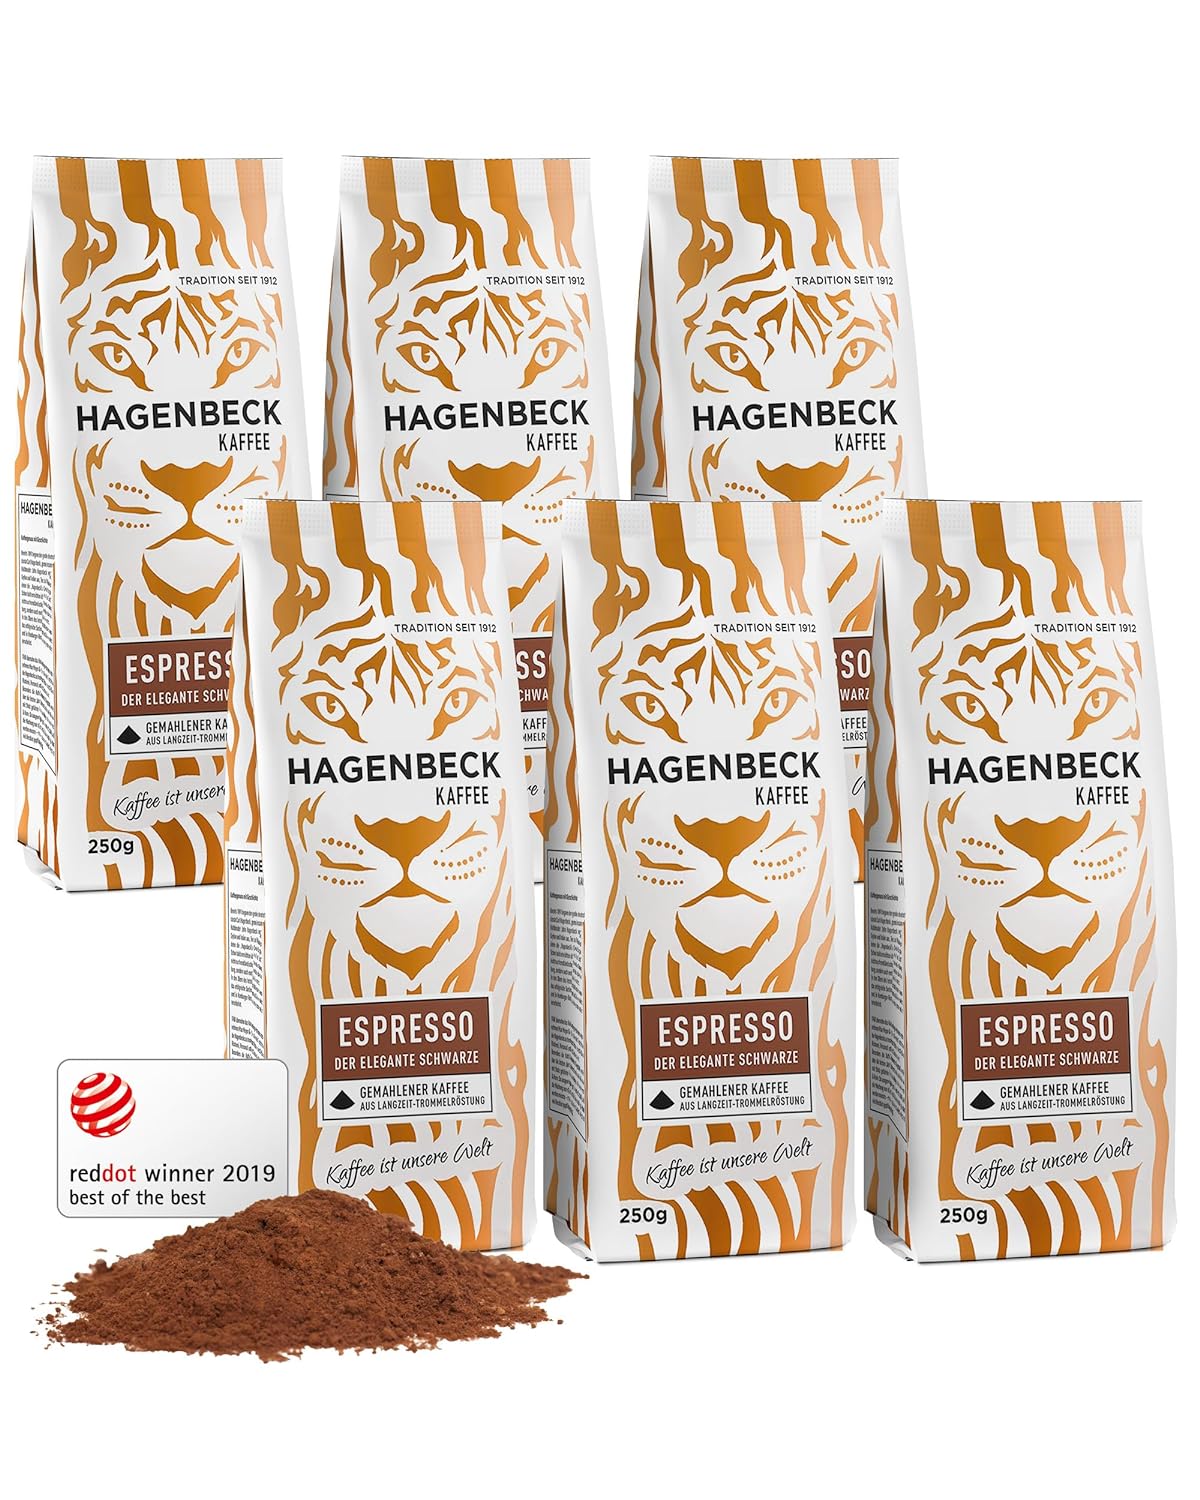 Hagenbeck Espresso 6x250g (1,5kg) | Ground coffee from traditional roasting | Strong, spicy taste with a soft chocolaty note | Ground Coffee Beans | Ideal for fully automatic coffee machines